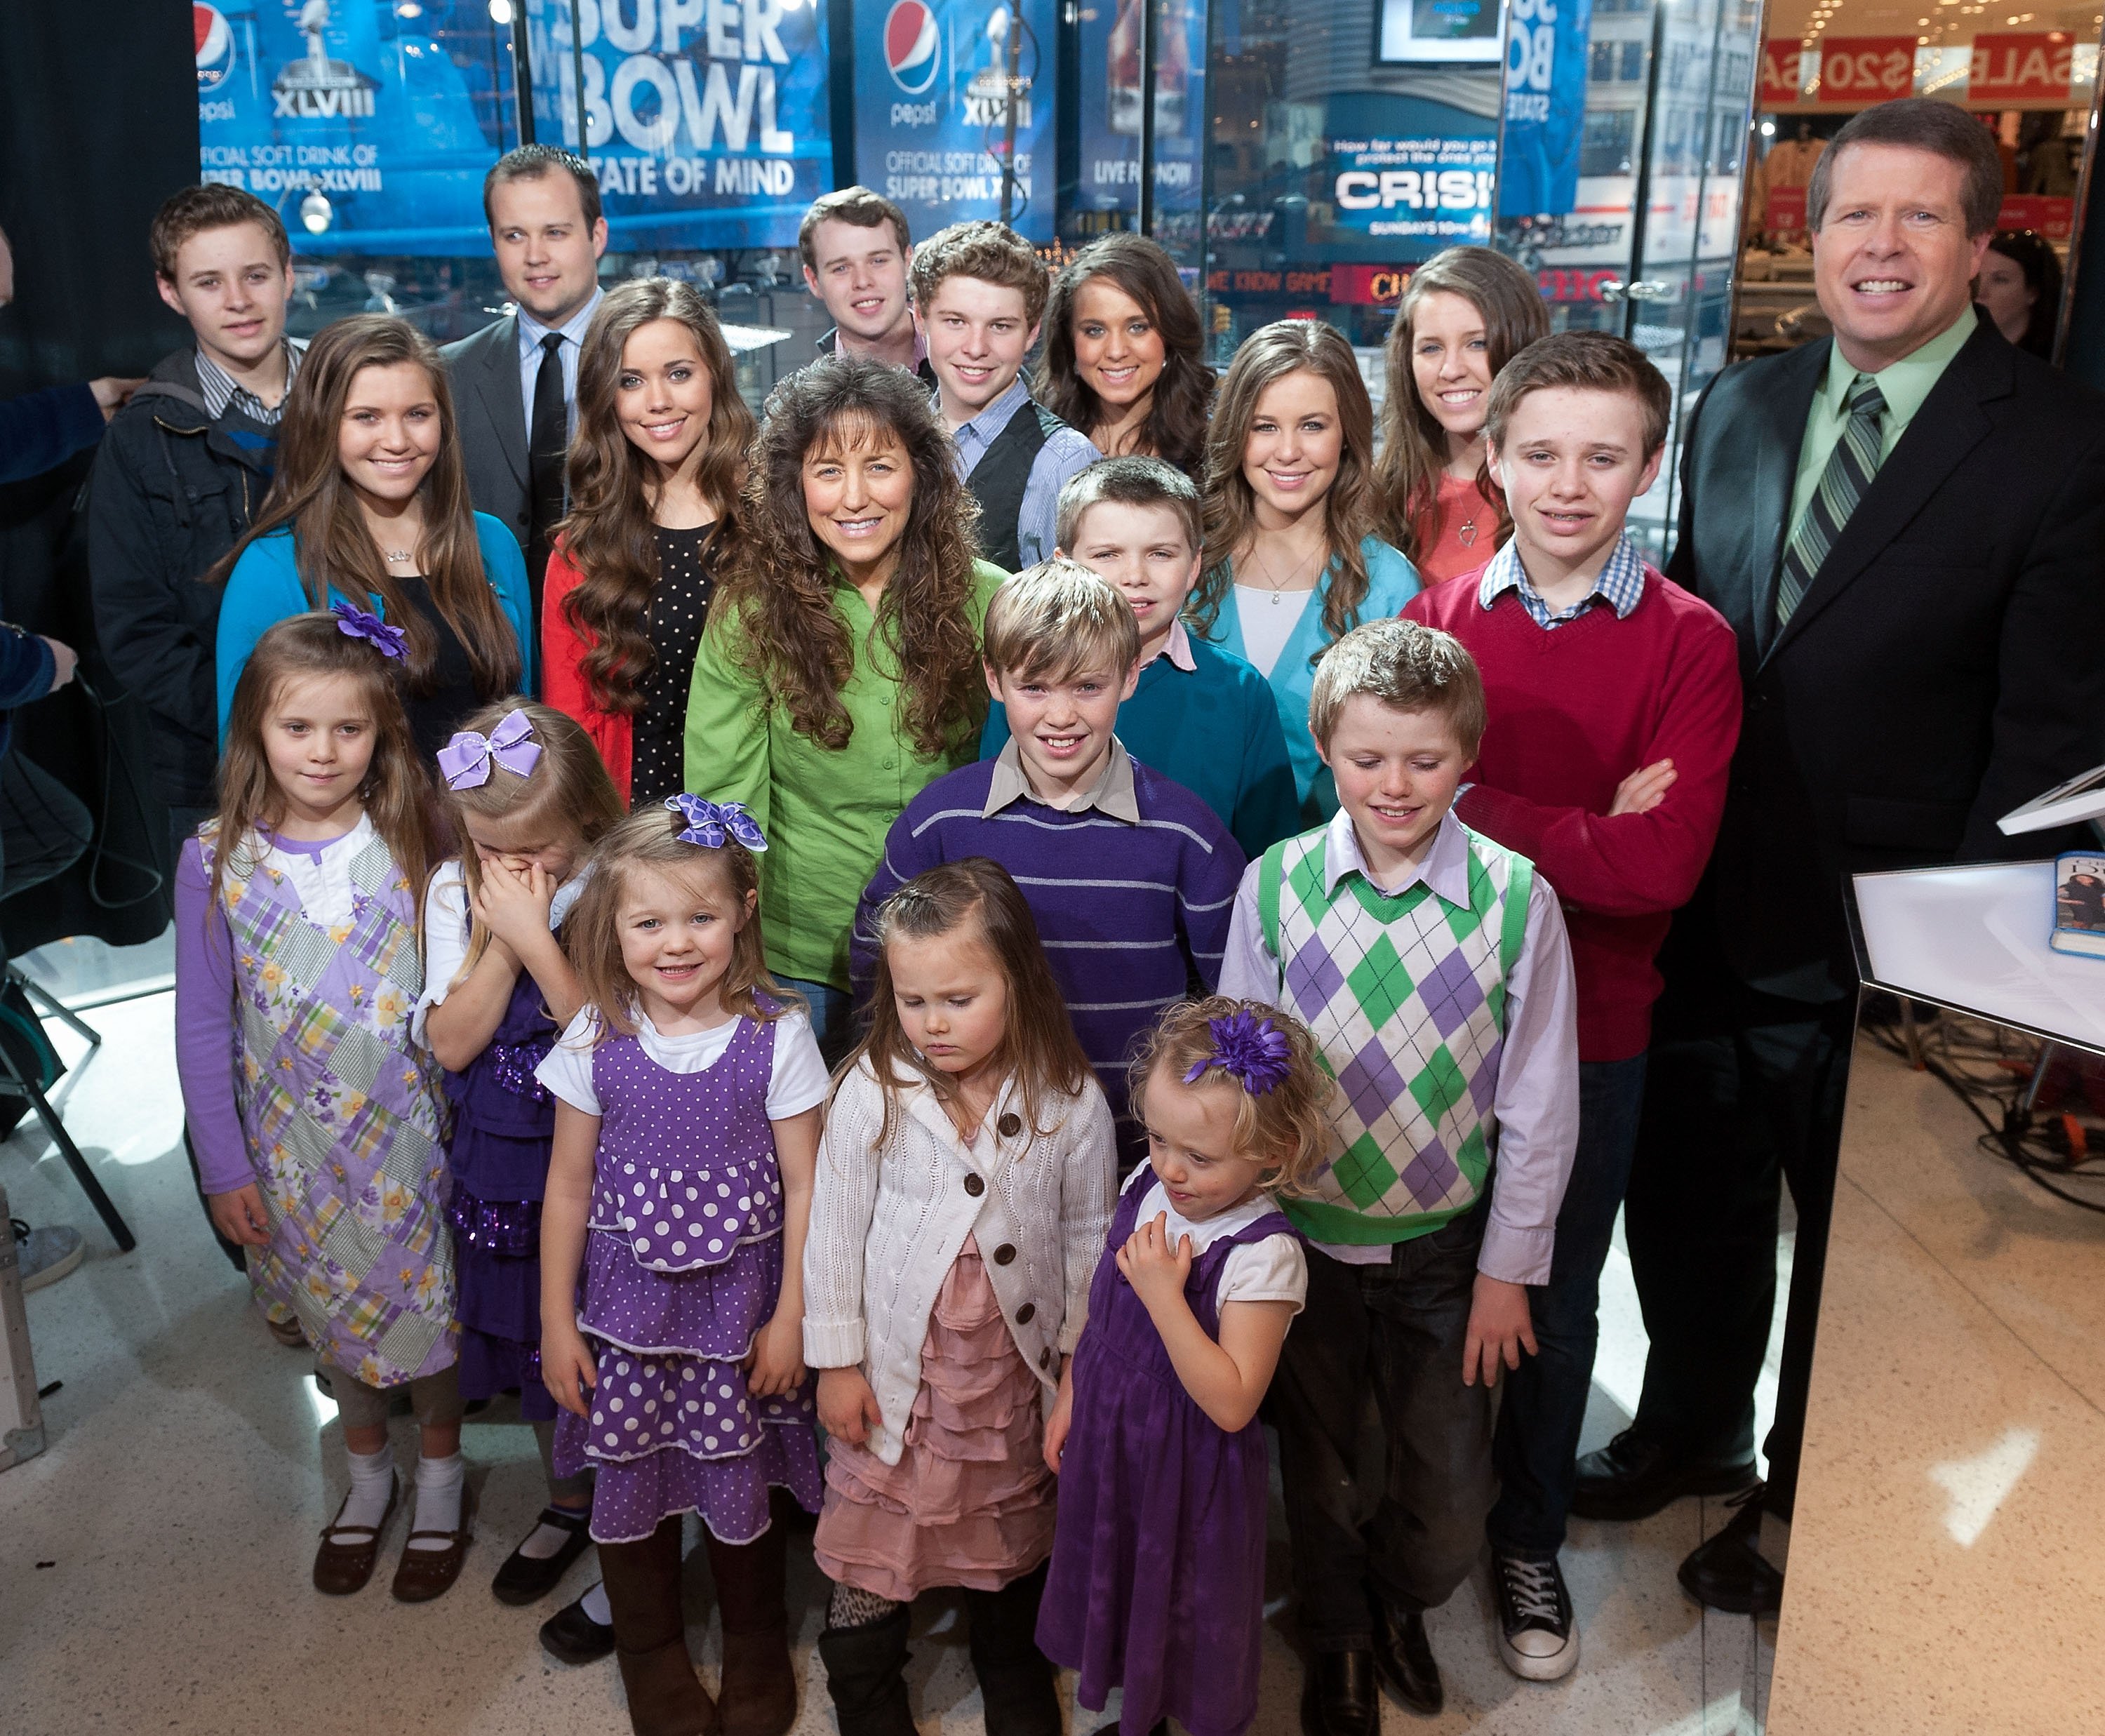 The Duggar Family visits the "Extra" studio in New York City on March 11, 2014 | Photo: Getty Images